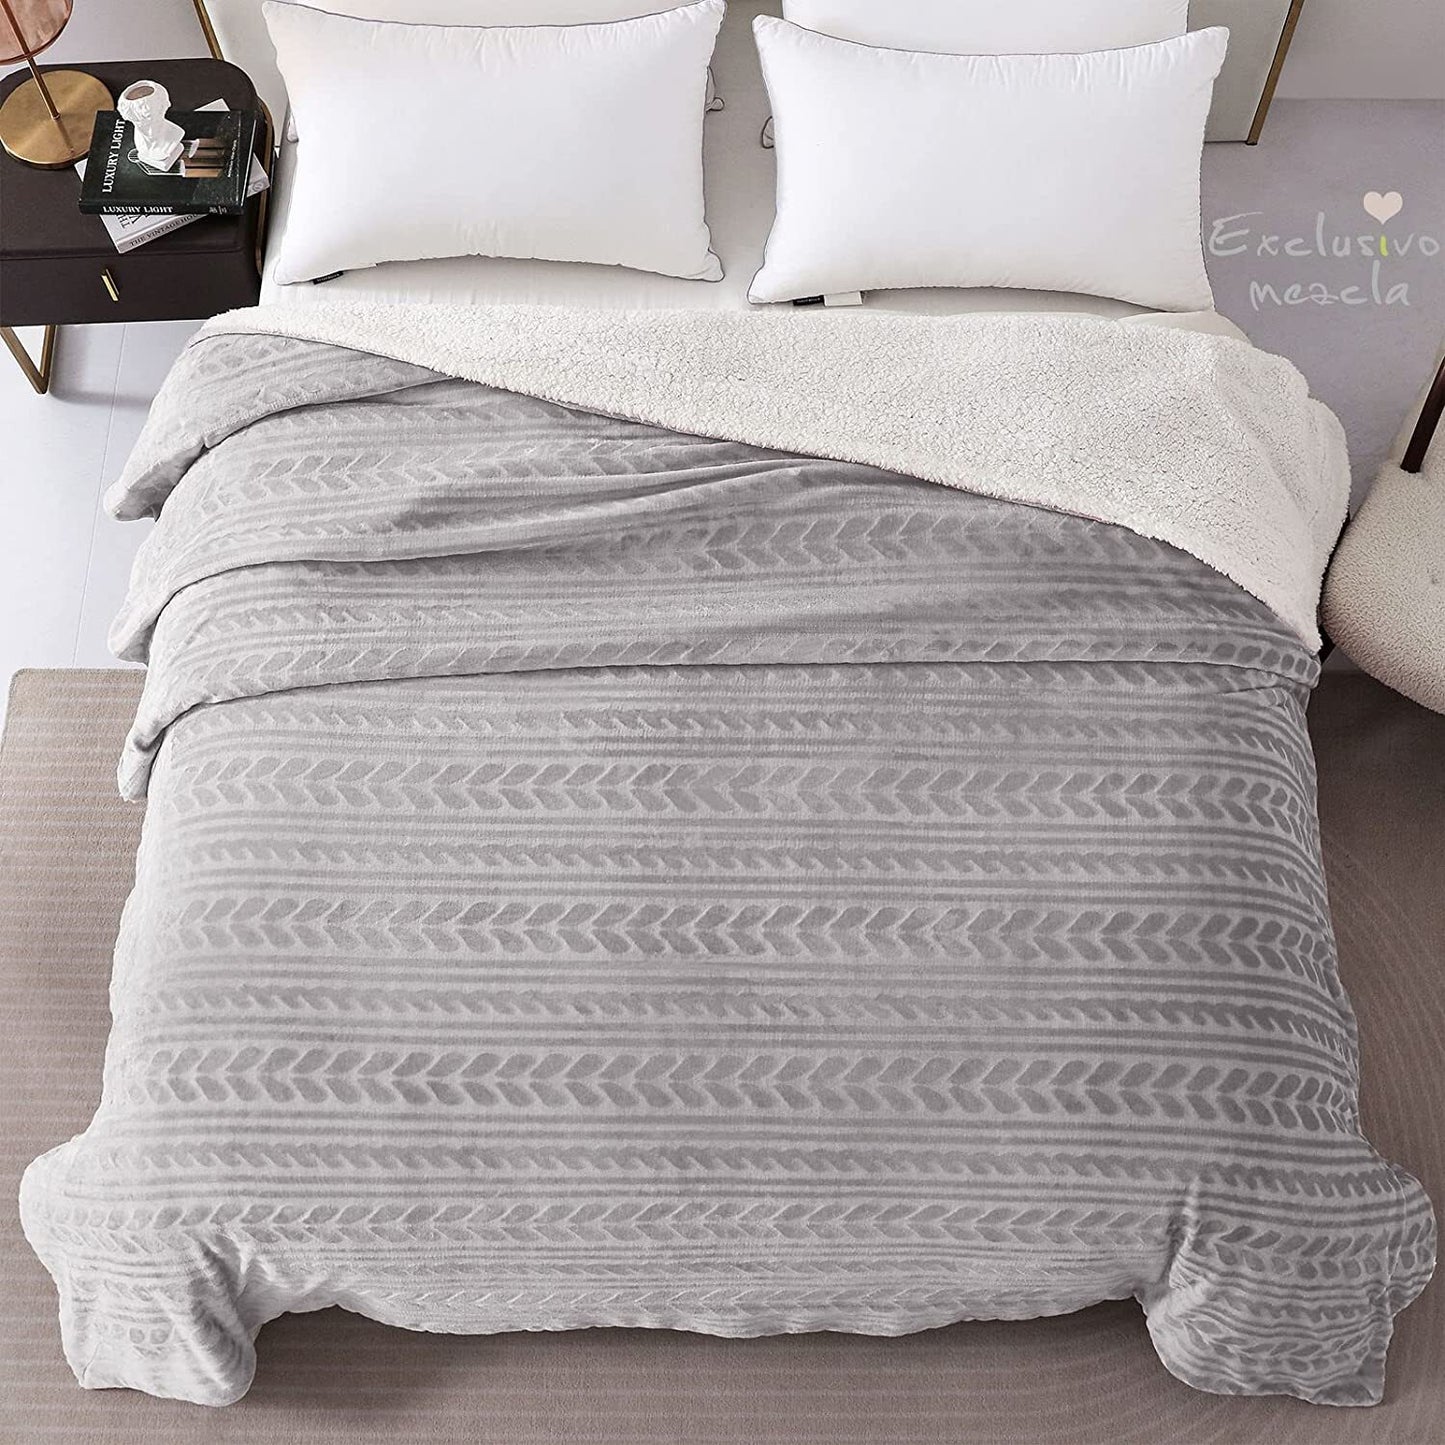 Exclusivo Mezcla Twin Size Sherpa Fleece Bed Blanket, Ultra Soft and Warm Reversible Velvet Blankets for Bed Couch Sofa 90x66 inches, Light Grey